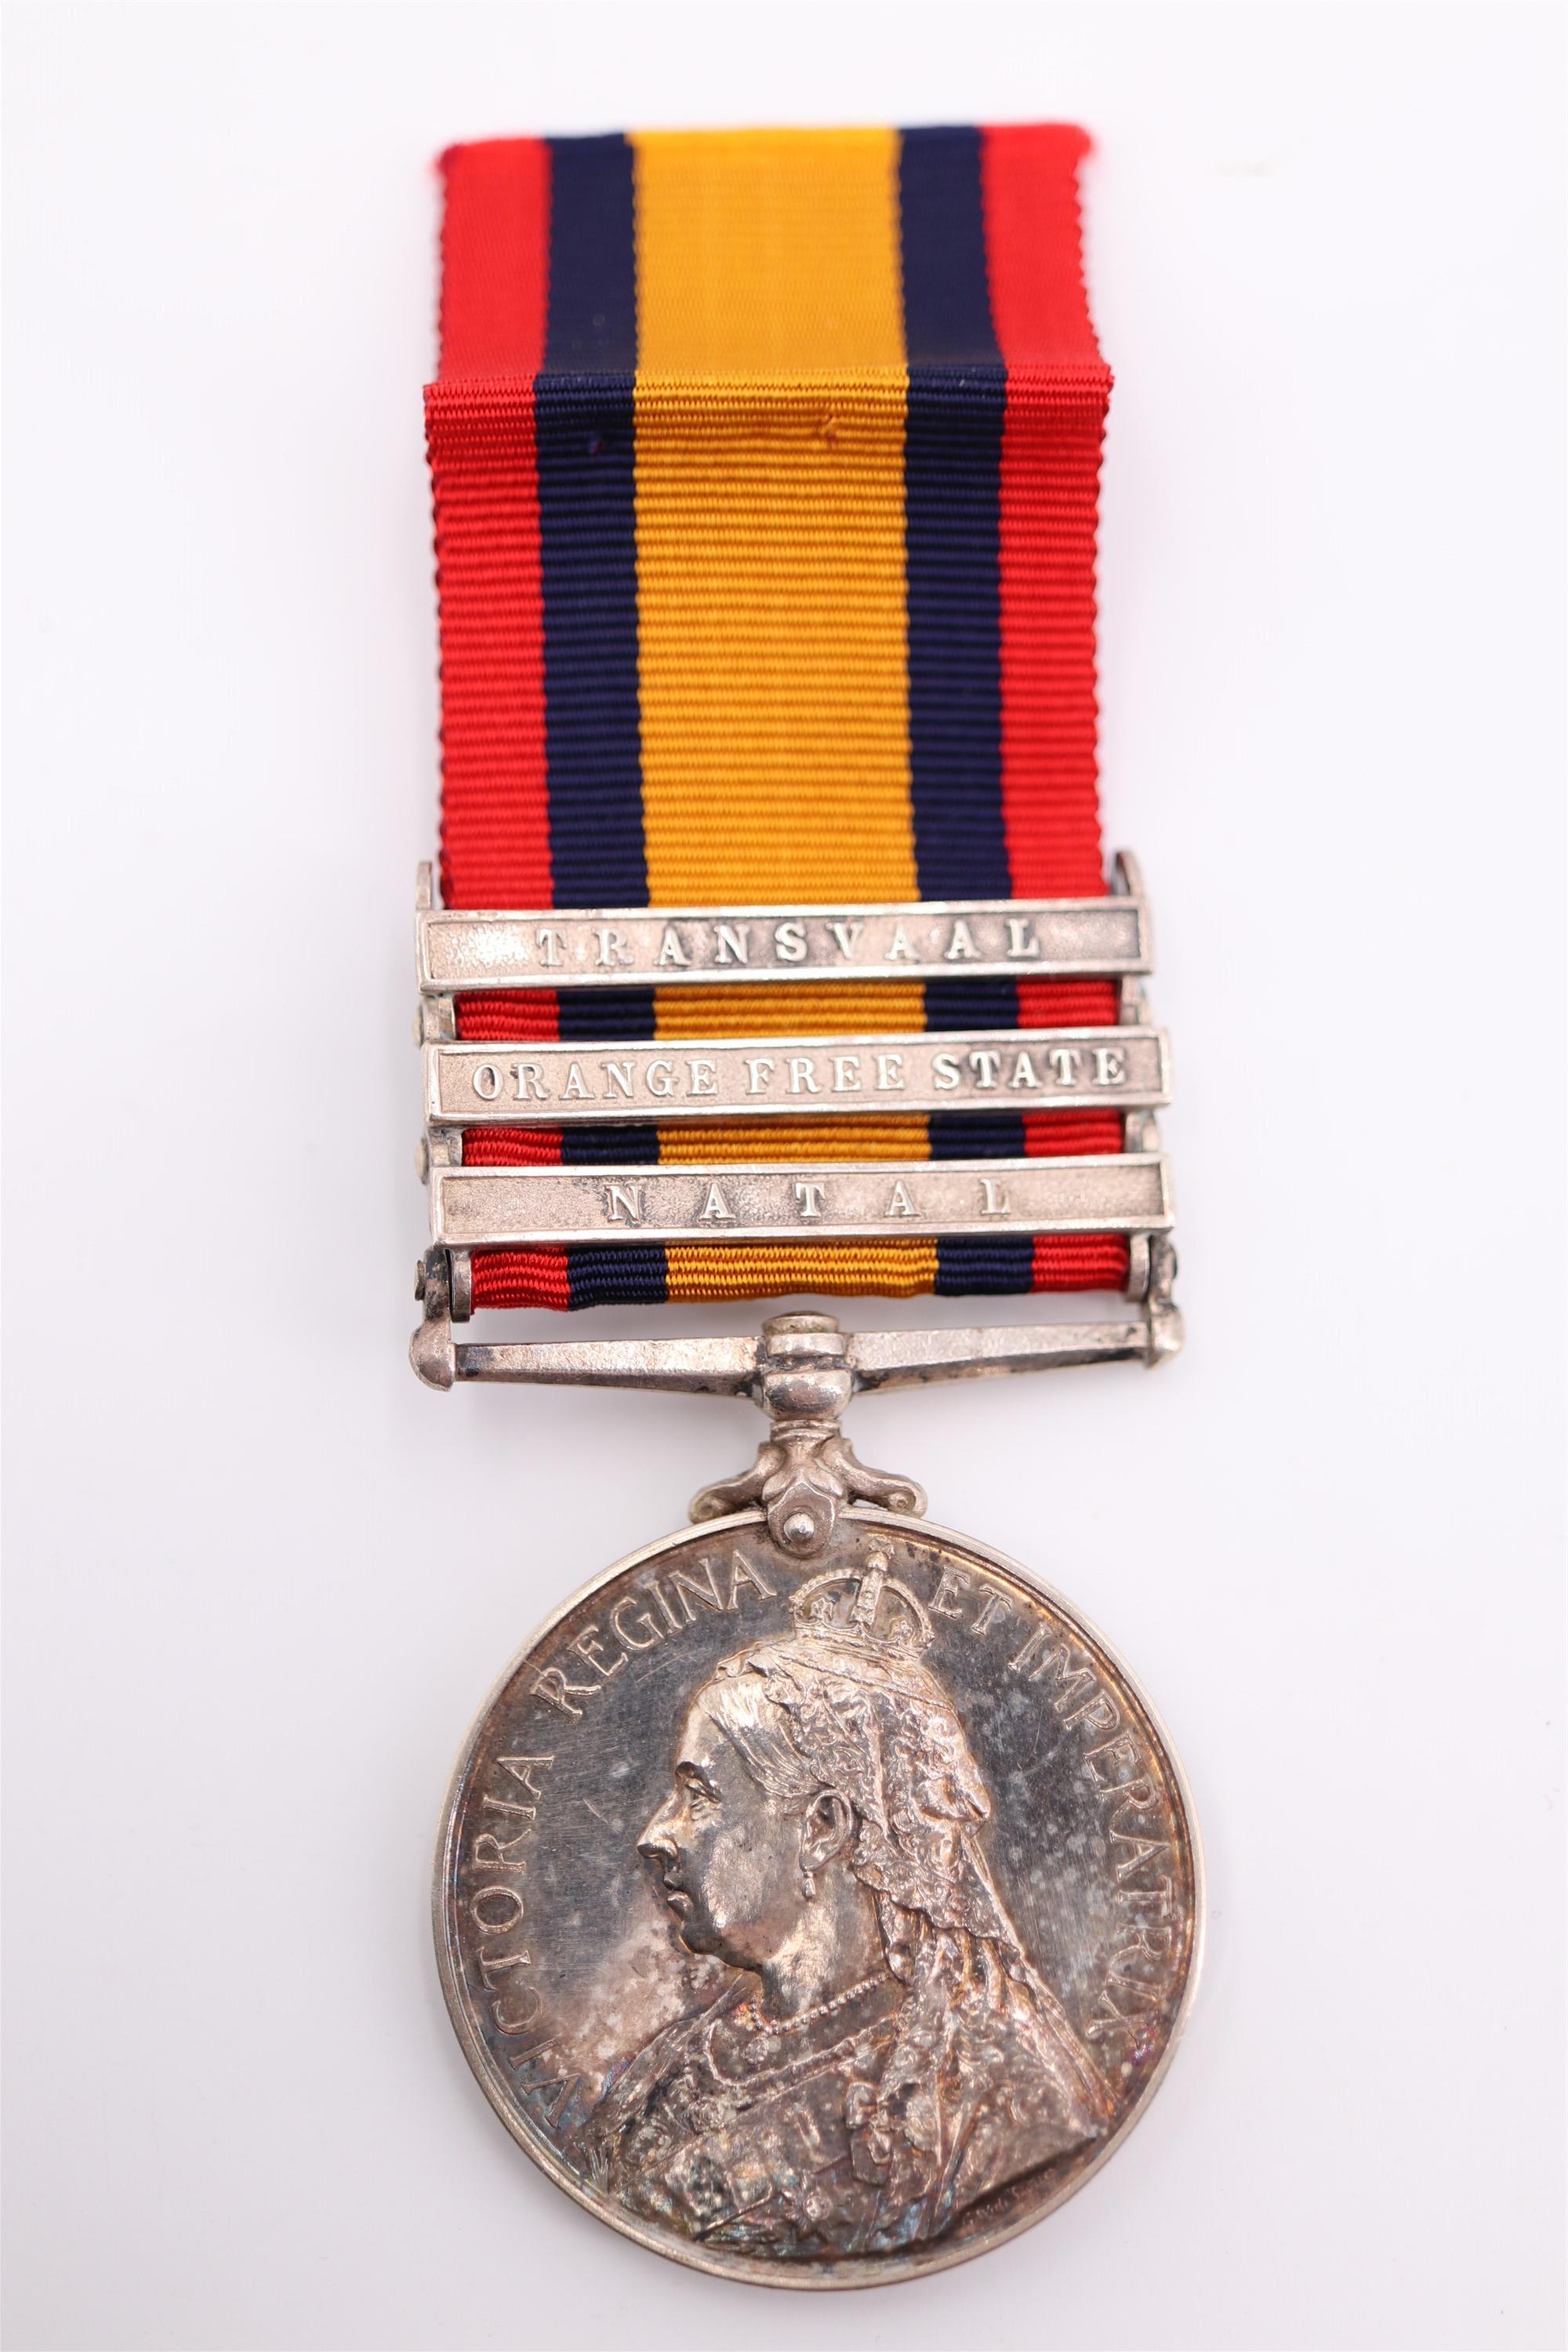 A Queen's South Africa Medal with three clasps to 3900 Pte R Hewitson, 1st Battalion Border Regiment